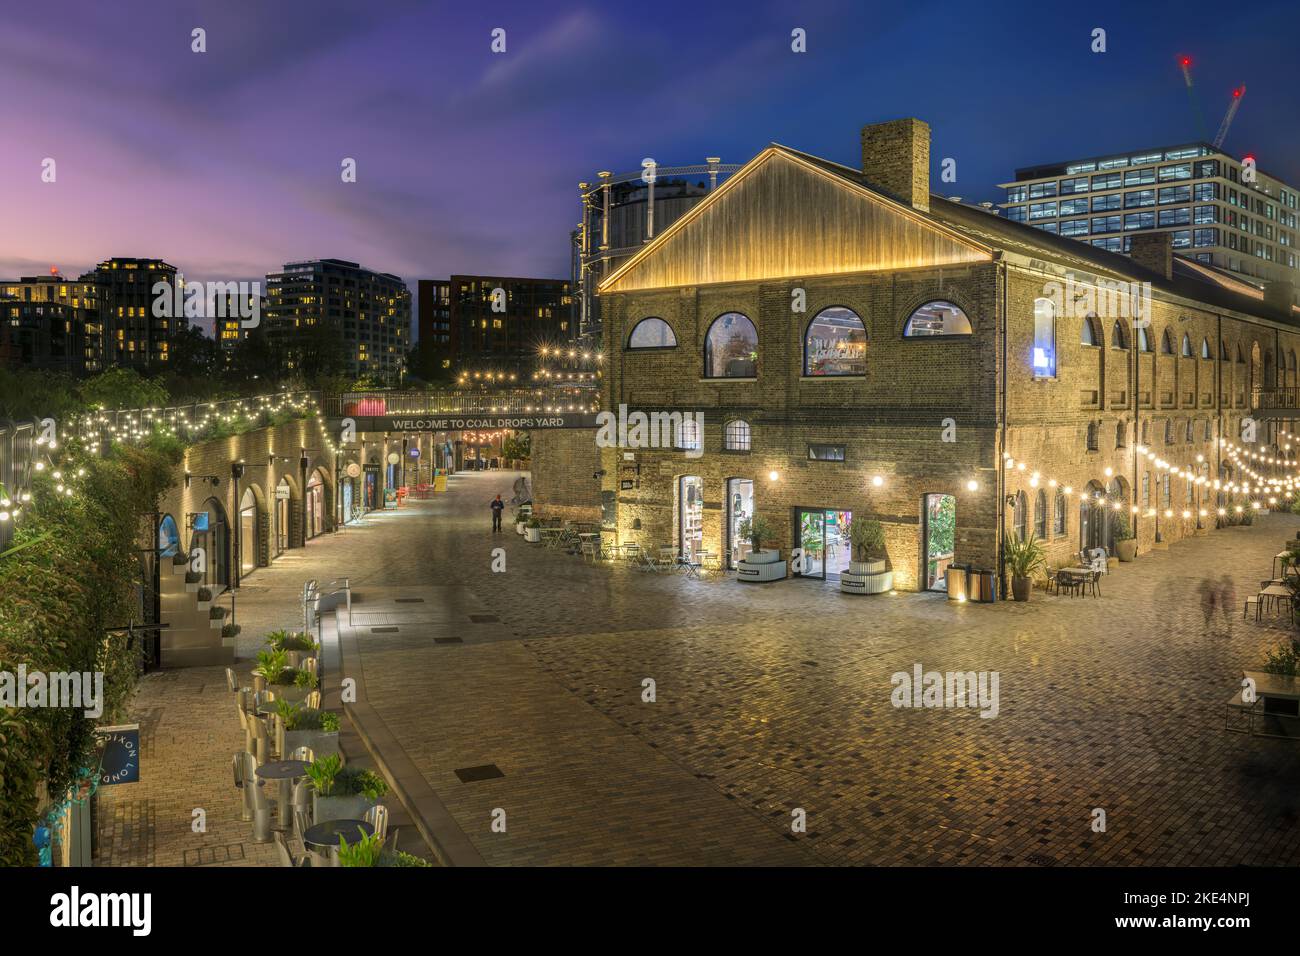 Coal Drops Yard, on the Regent's Canal at Kings Cross in London, taken at dusk on a November evening. Stock Photo